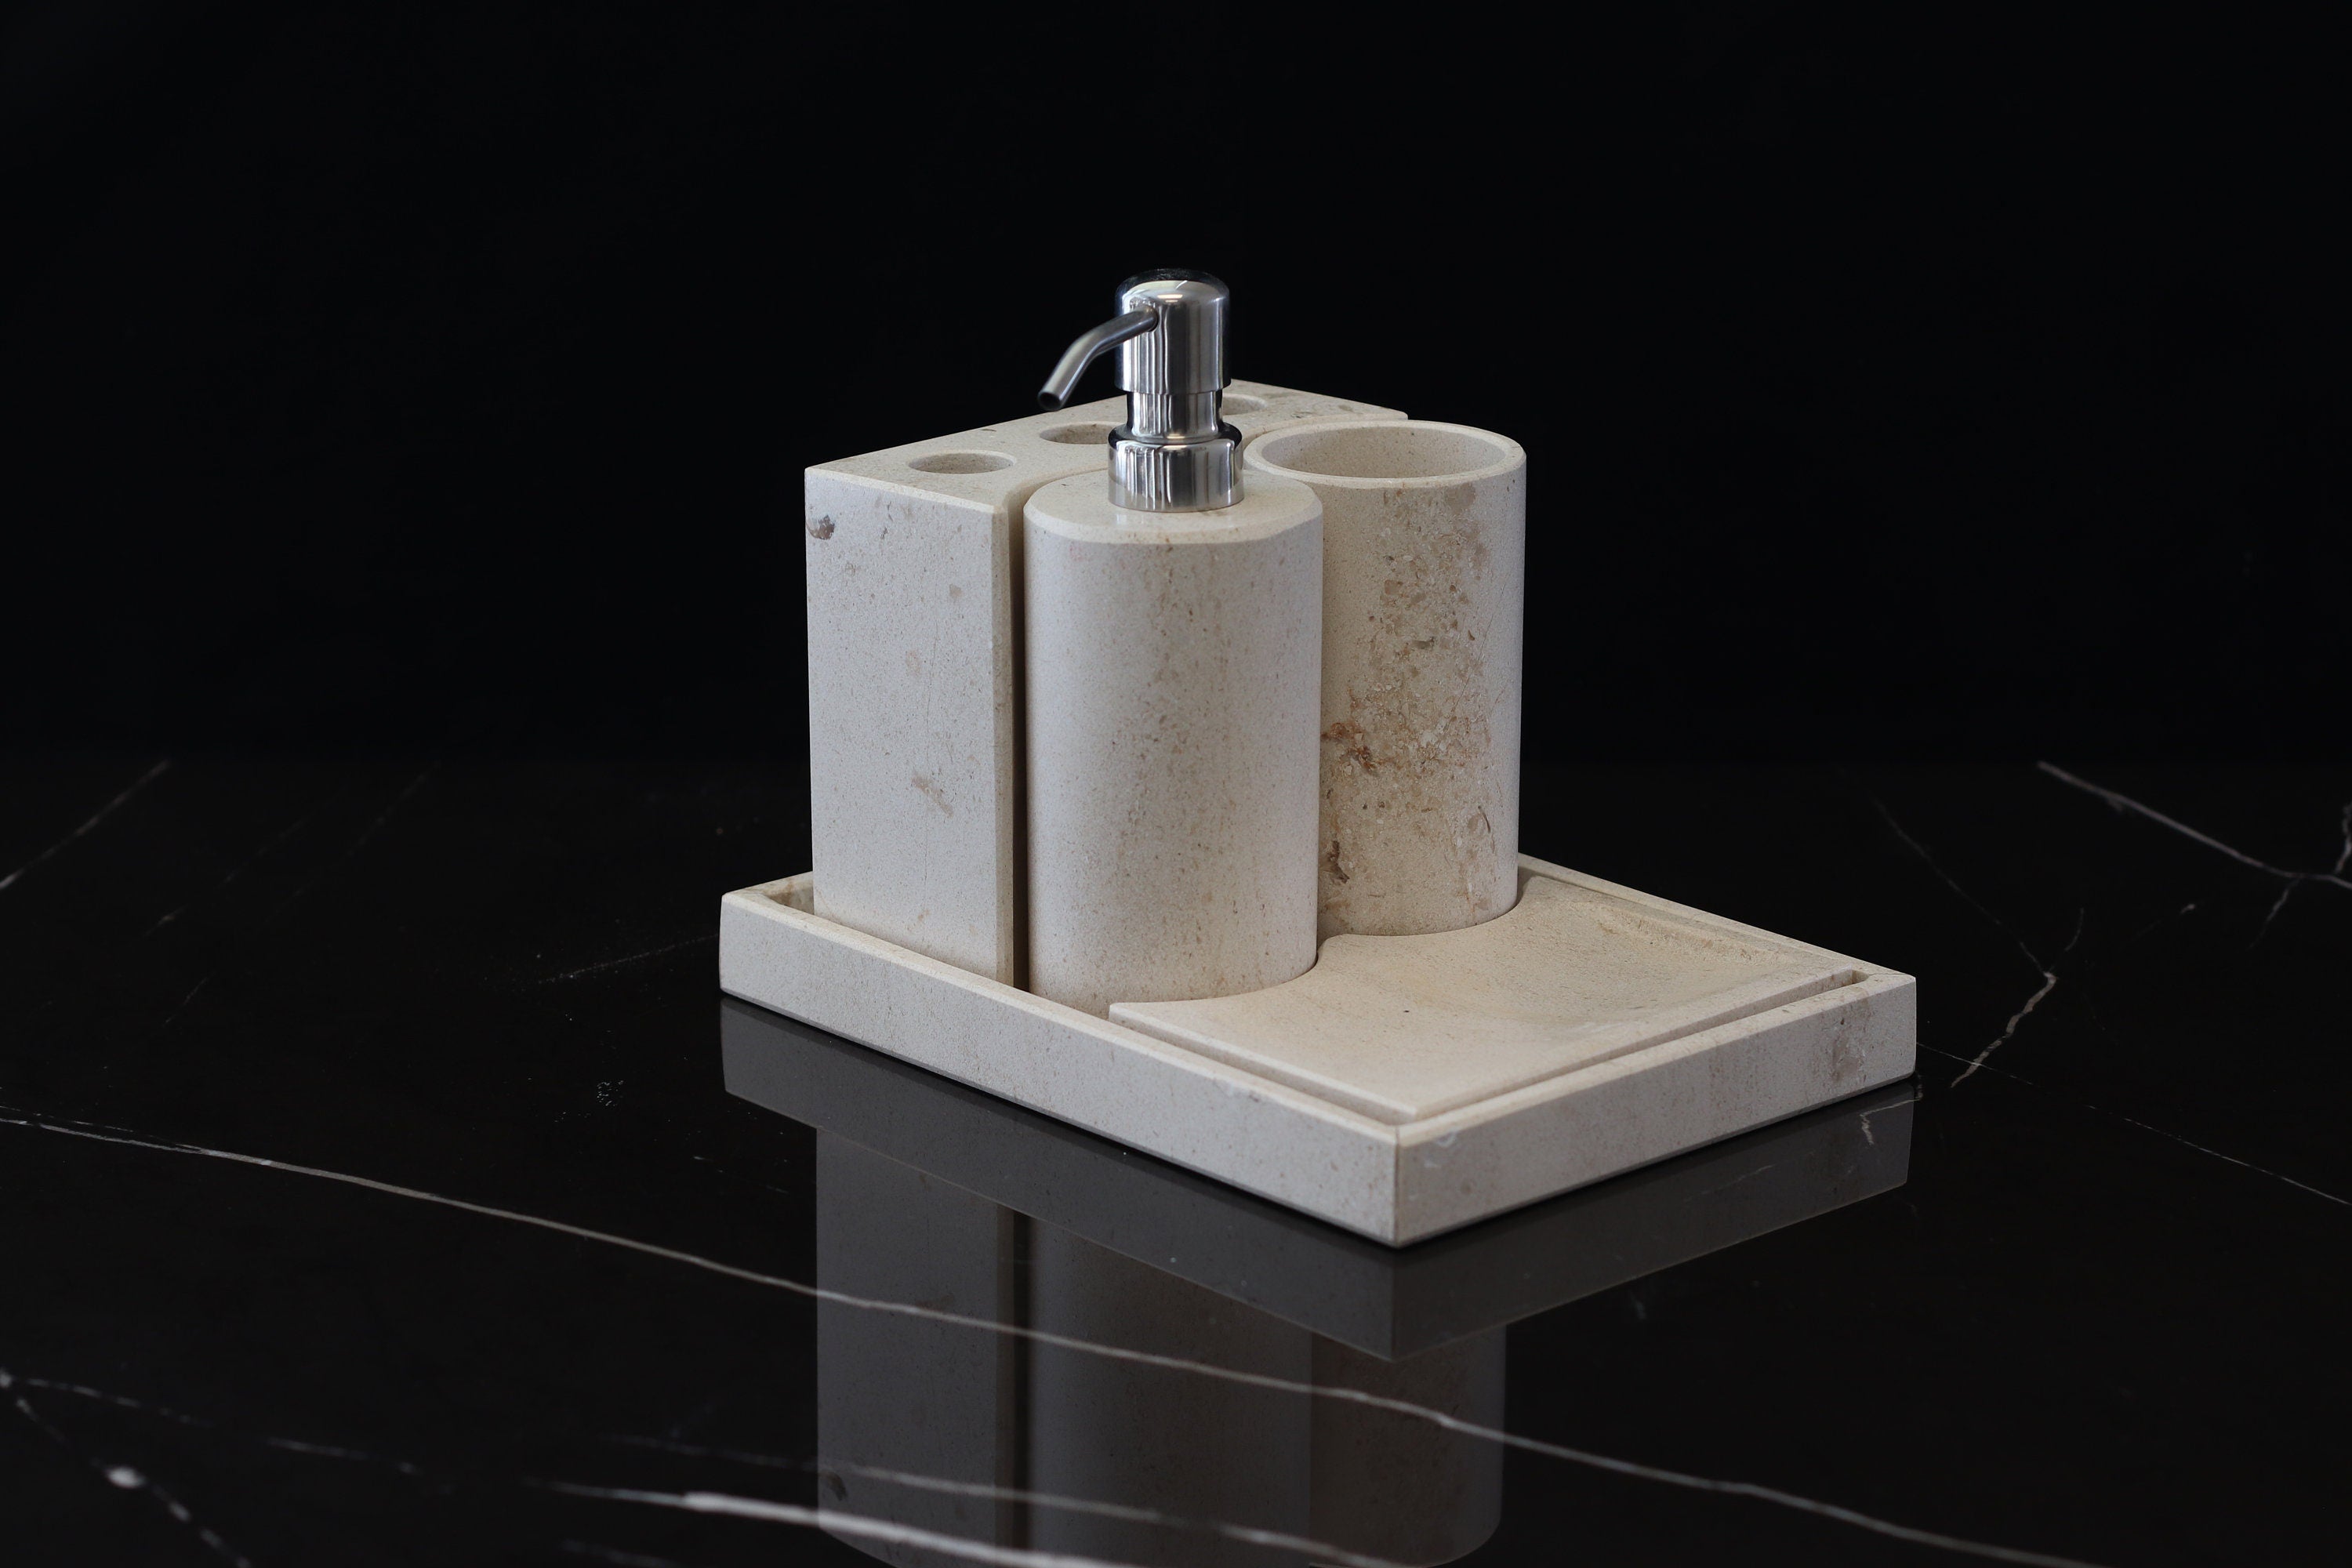 Set of 4 Travertine Bathroom Accessories Soap Dispenser & Toothbrush Holder  & Cup & Tray